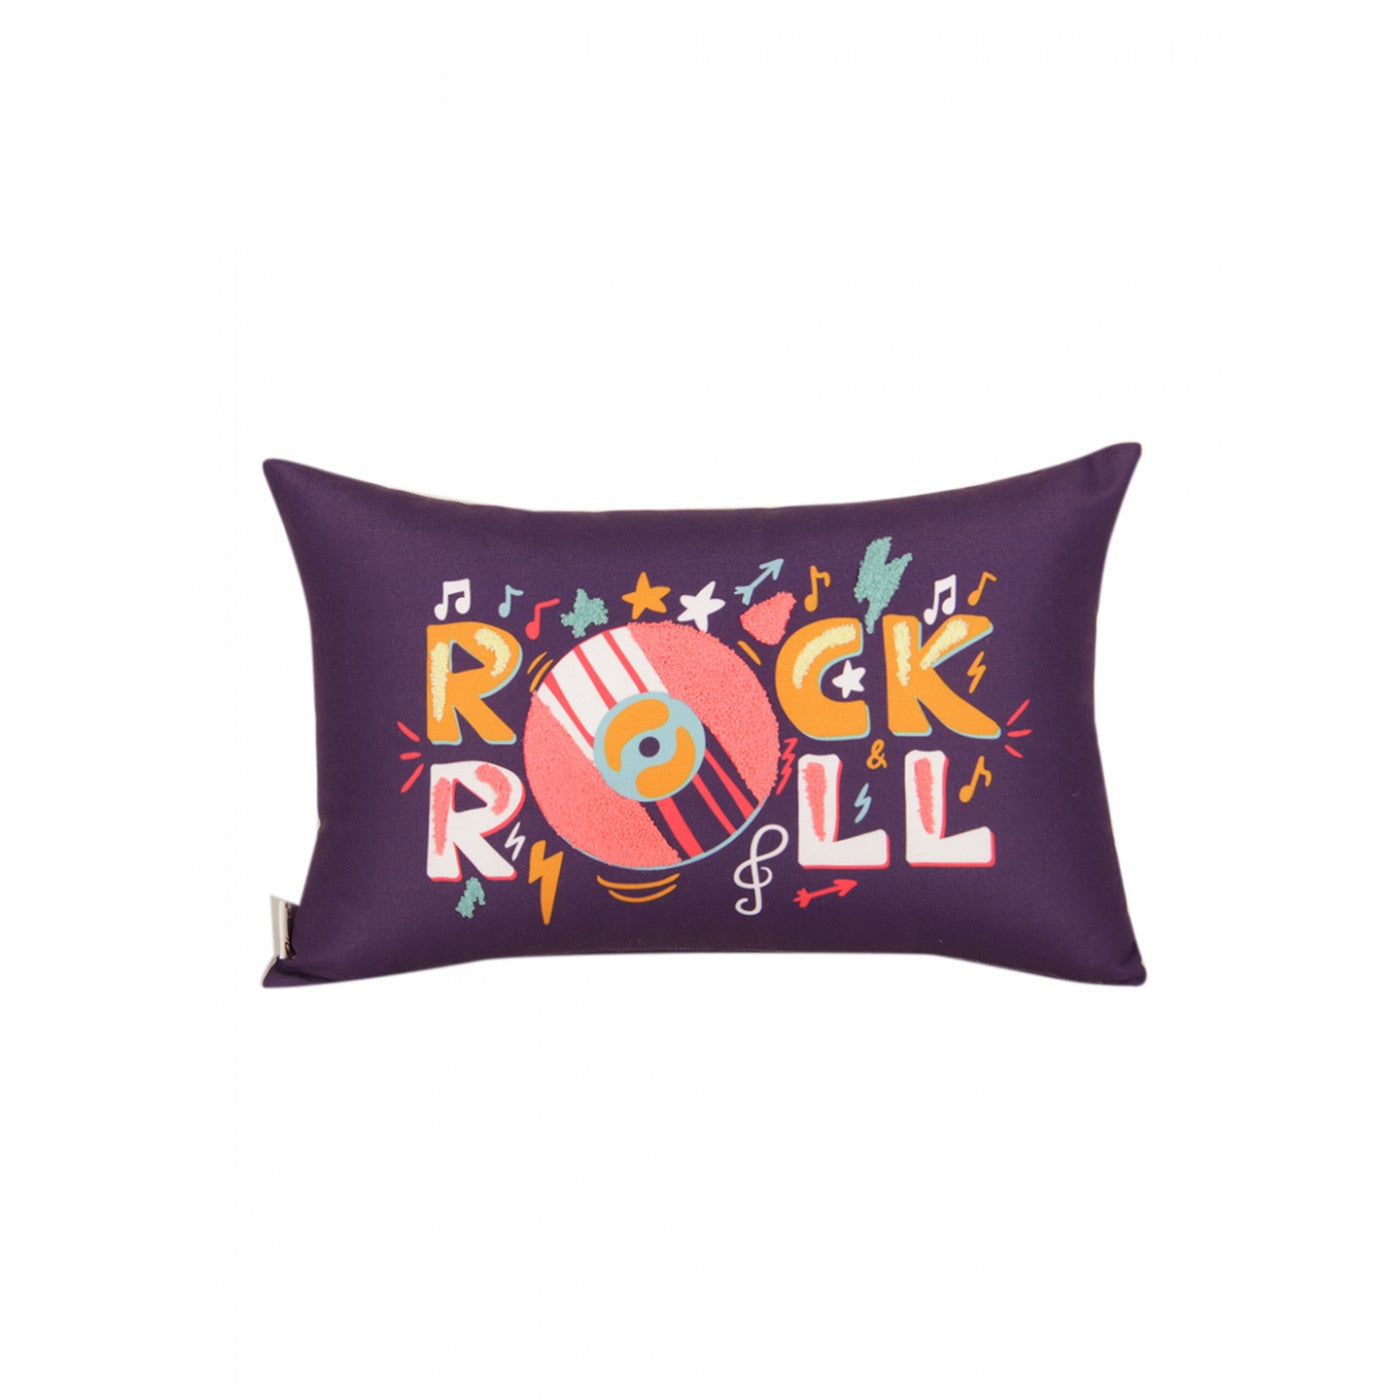 Rock And Roll Printed Cushion Cover 12x18